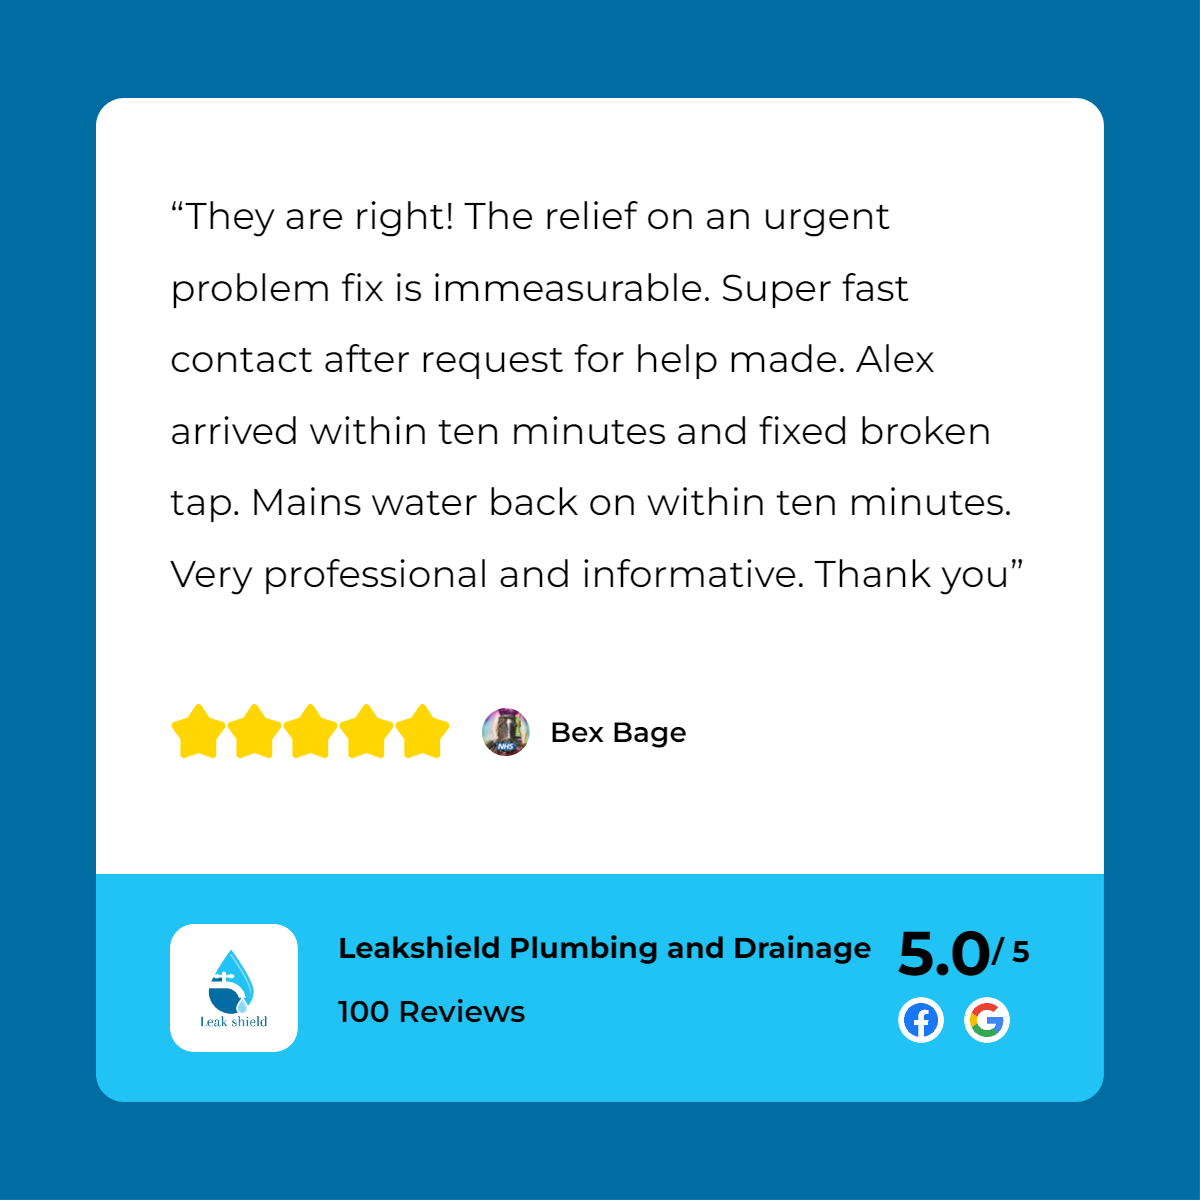 A review of a plumbing company with a star rating.